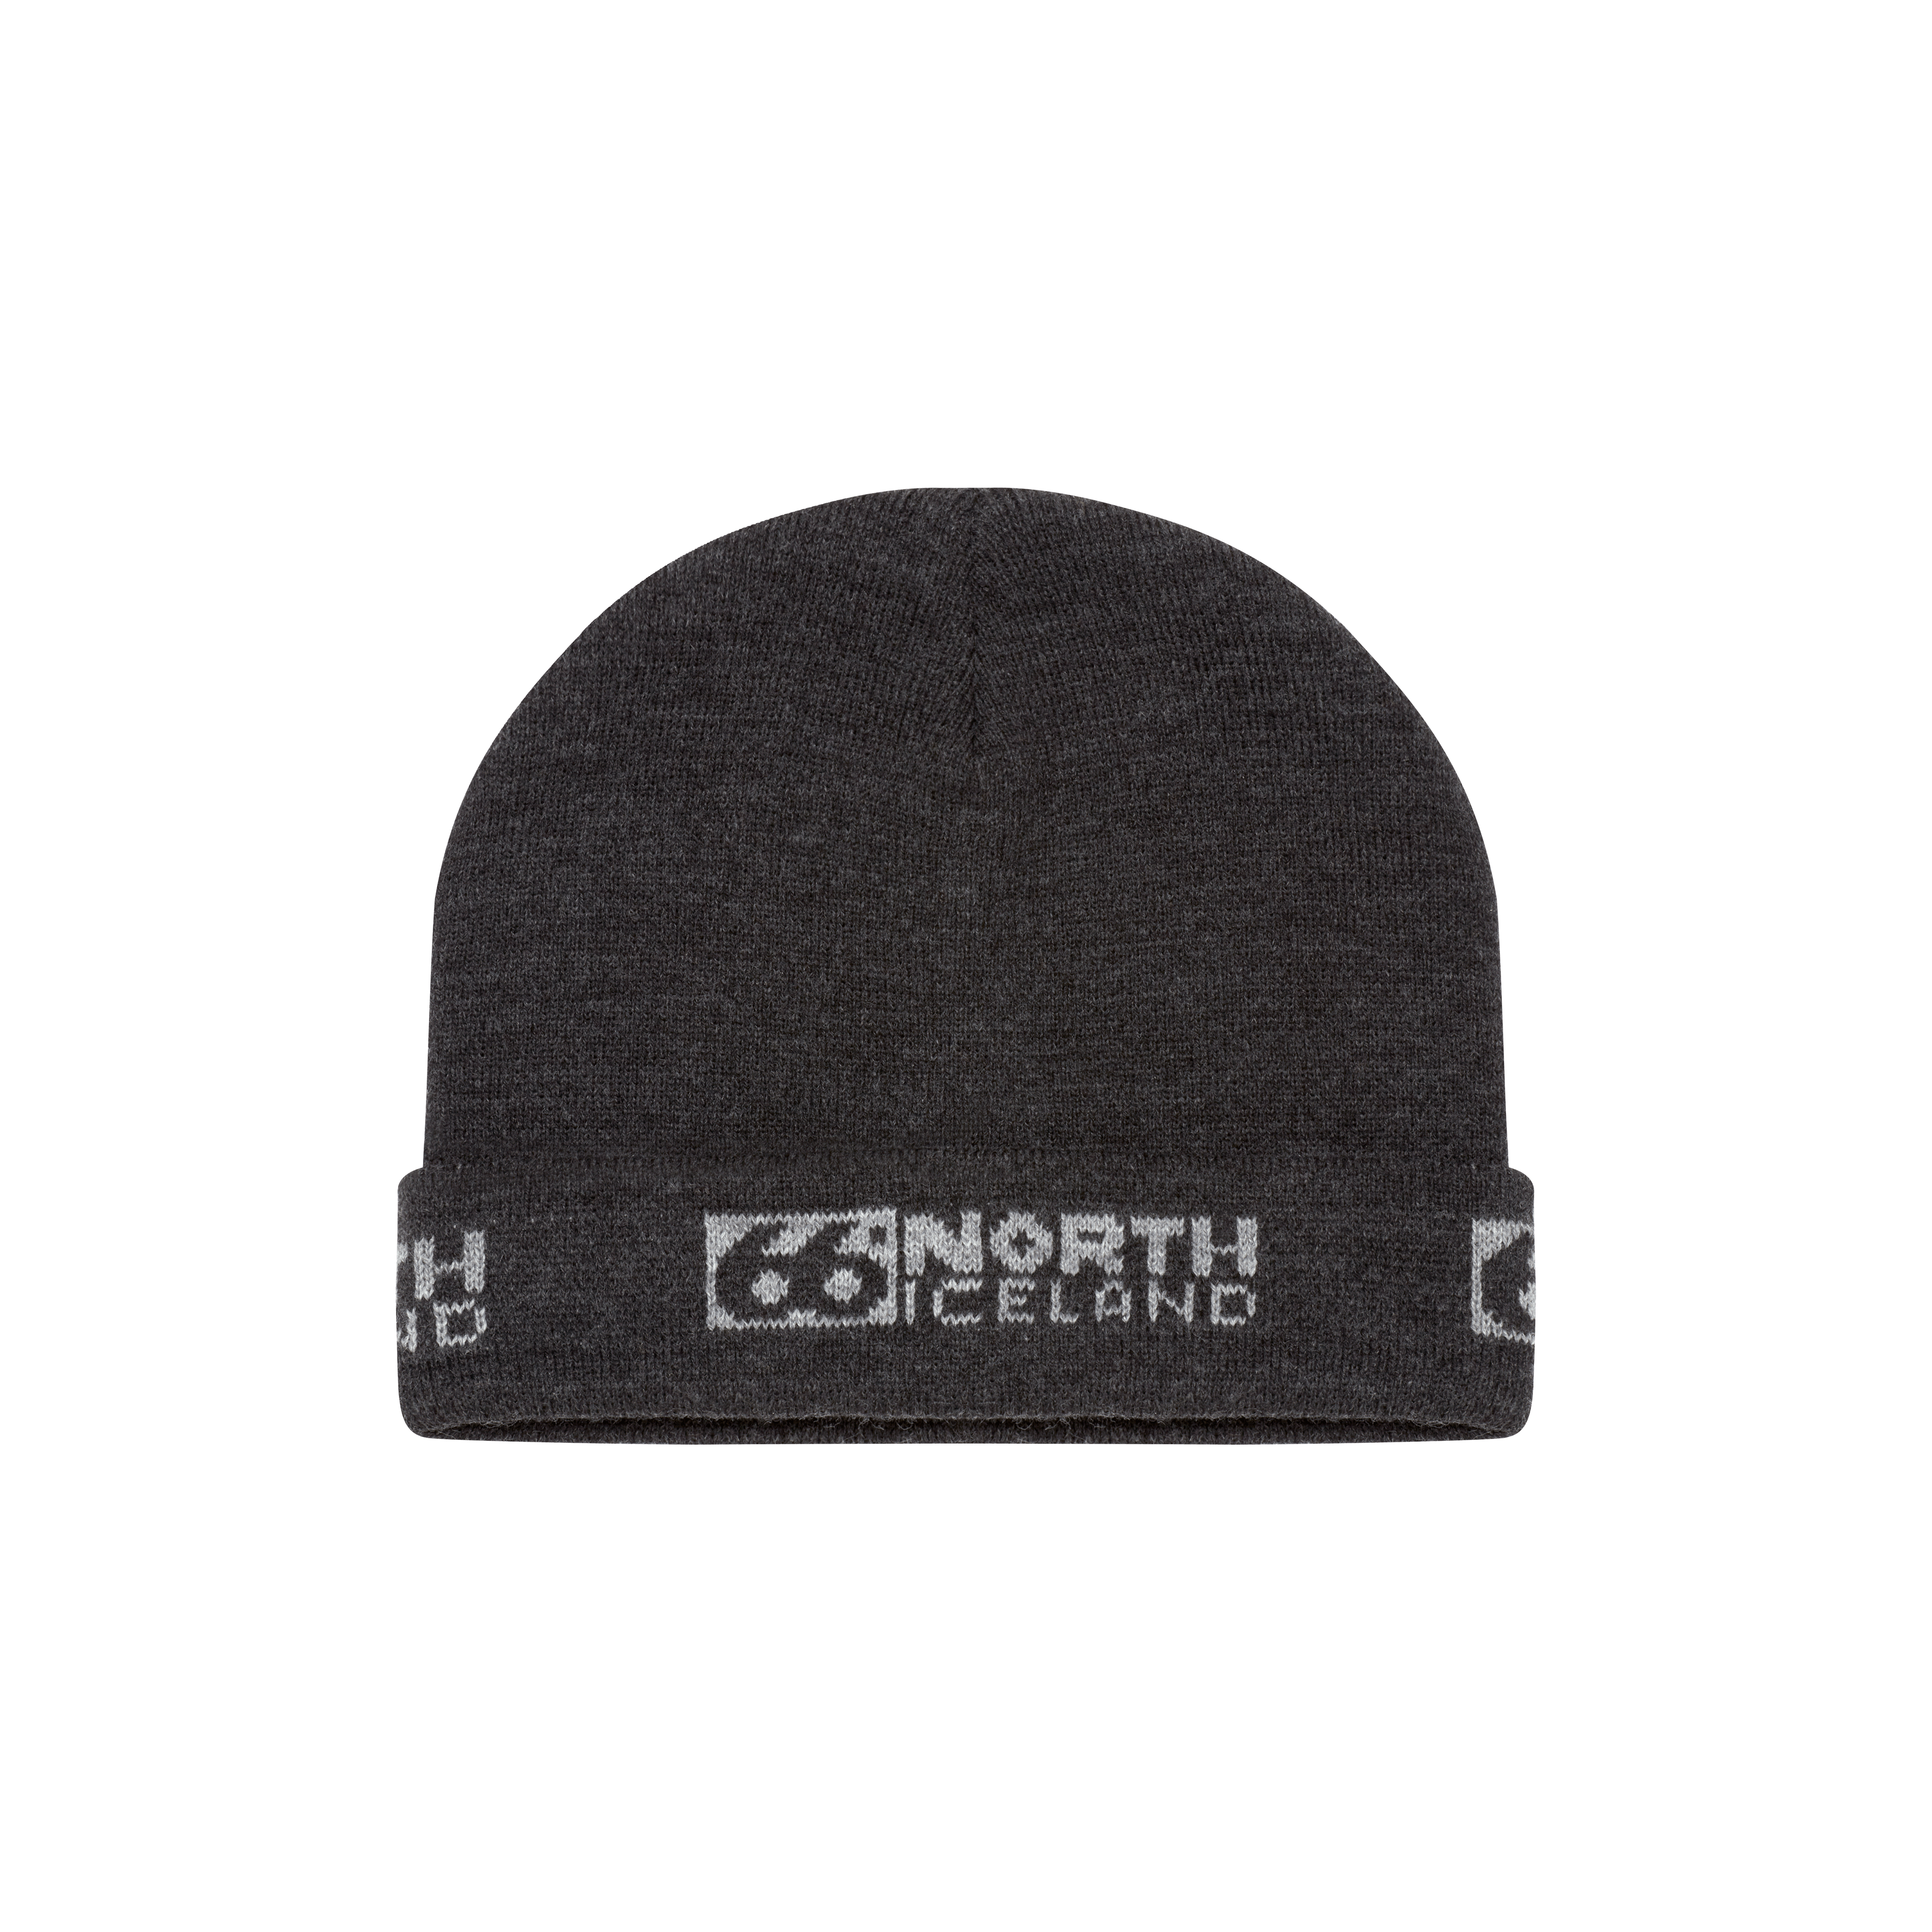 66 North Women's Workman Accessories - Obsidian / Grey - One Size